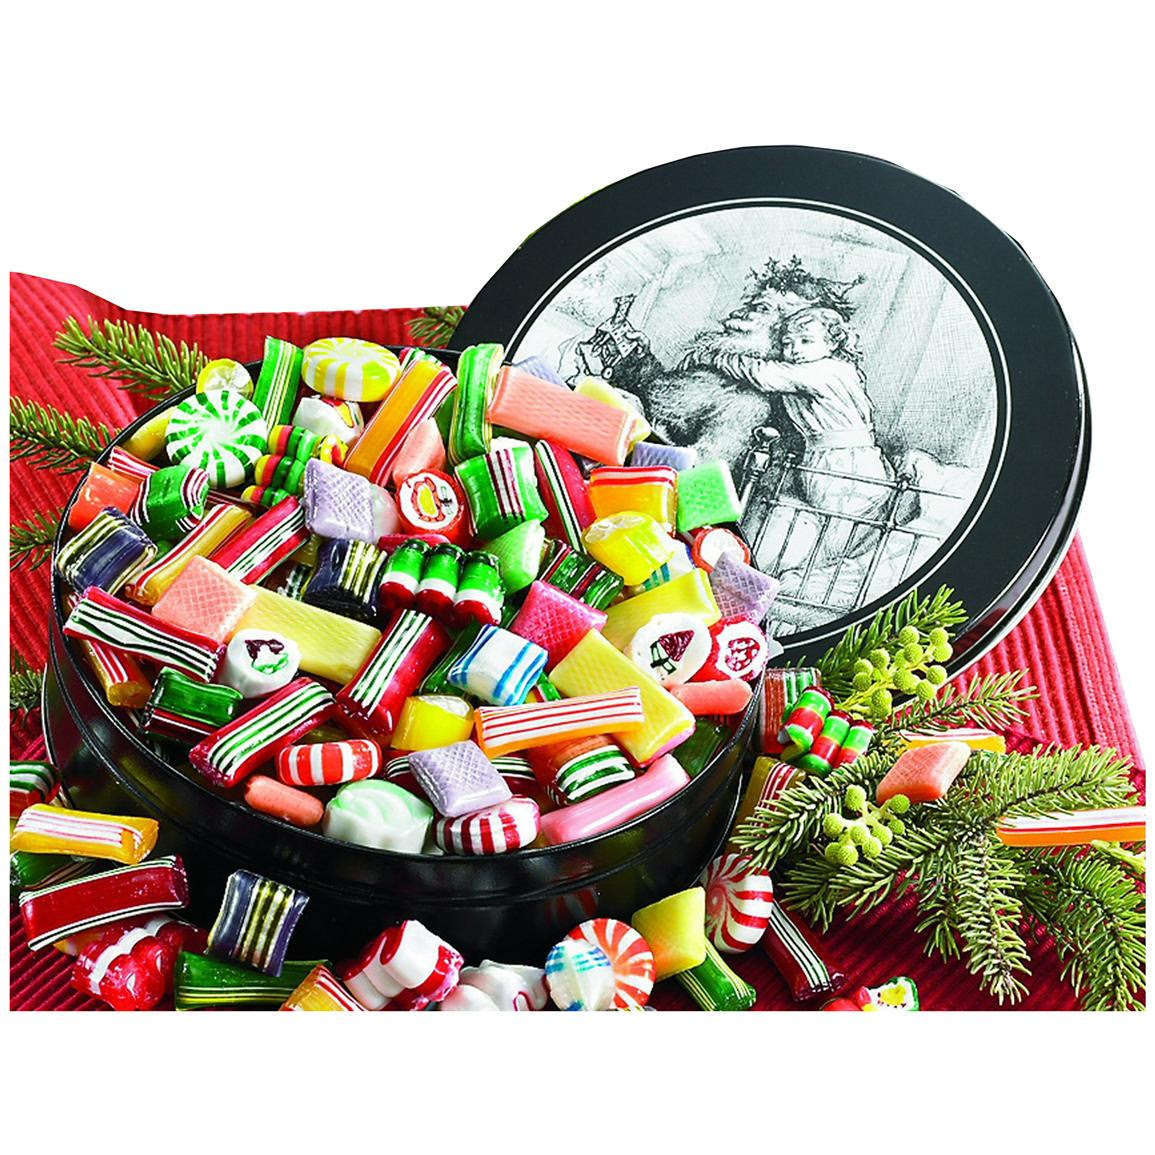 Figi's Old Fashioned Candy - 425361, Food Gifts at ...